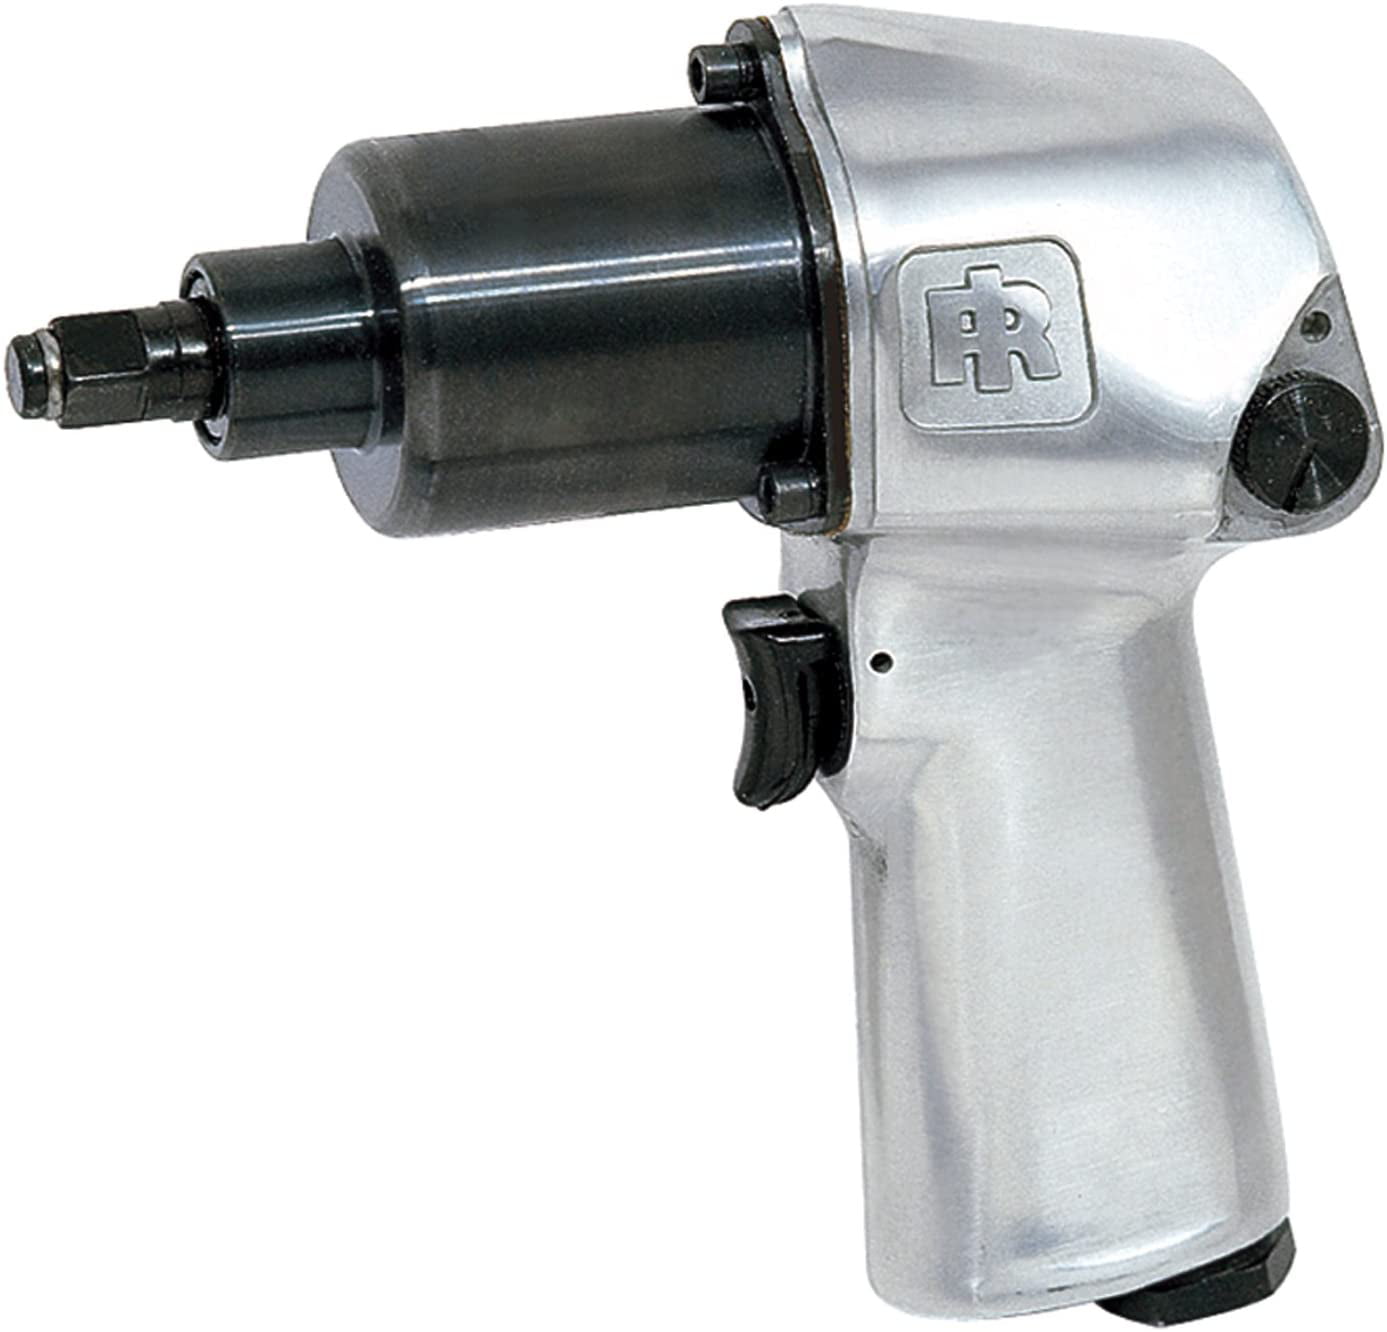 Ingersoll-Rand 2925RBP1TI Air Impact Wrench 3/4 in Dr 5200 rpm for sale online 